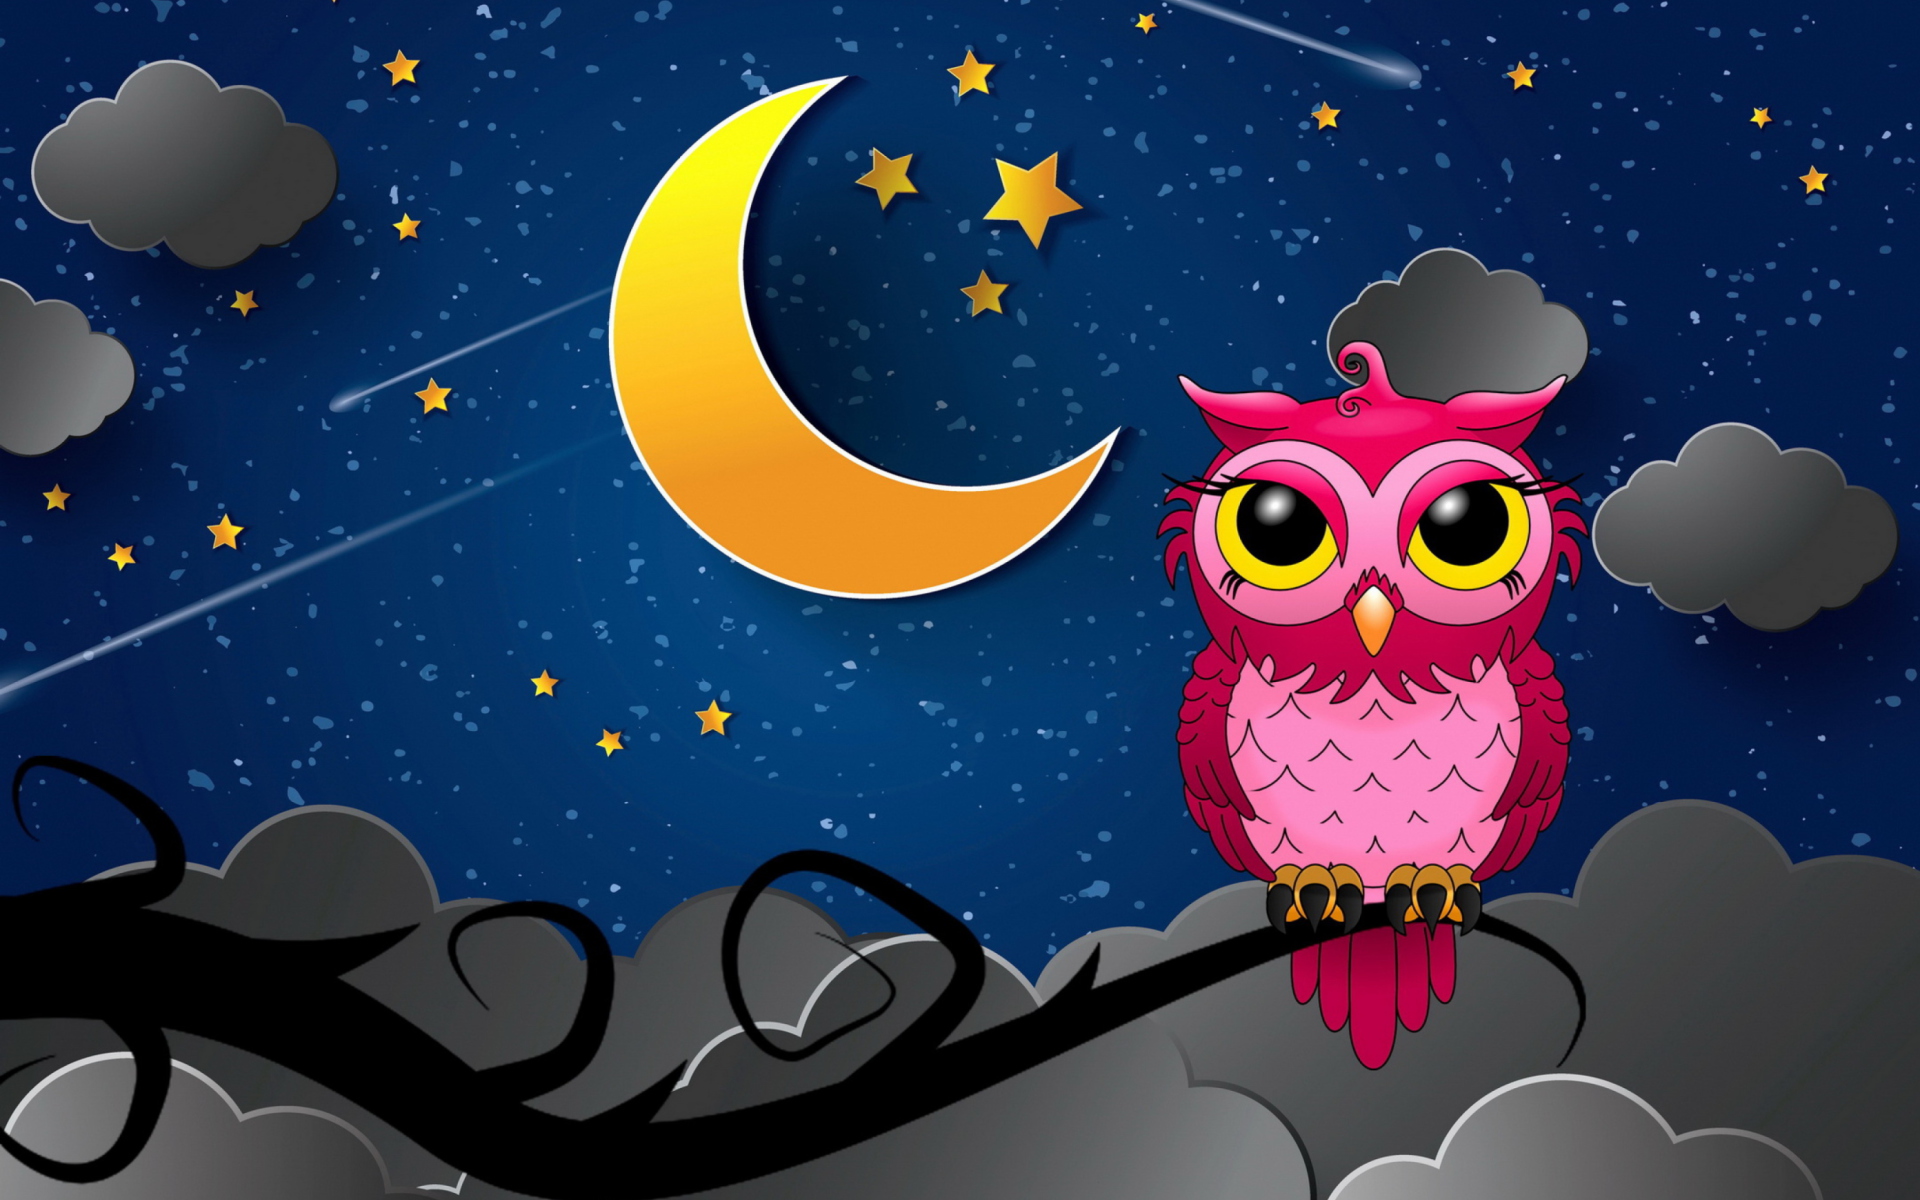 Night Sky With Moon And Owl - HD Wallpaper 